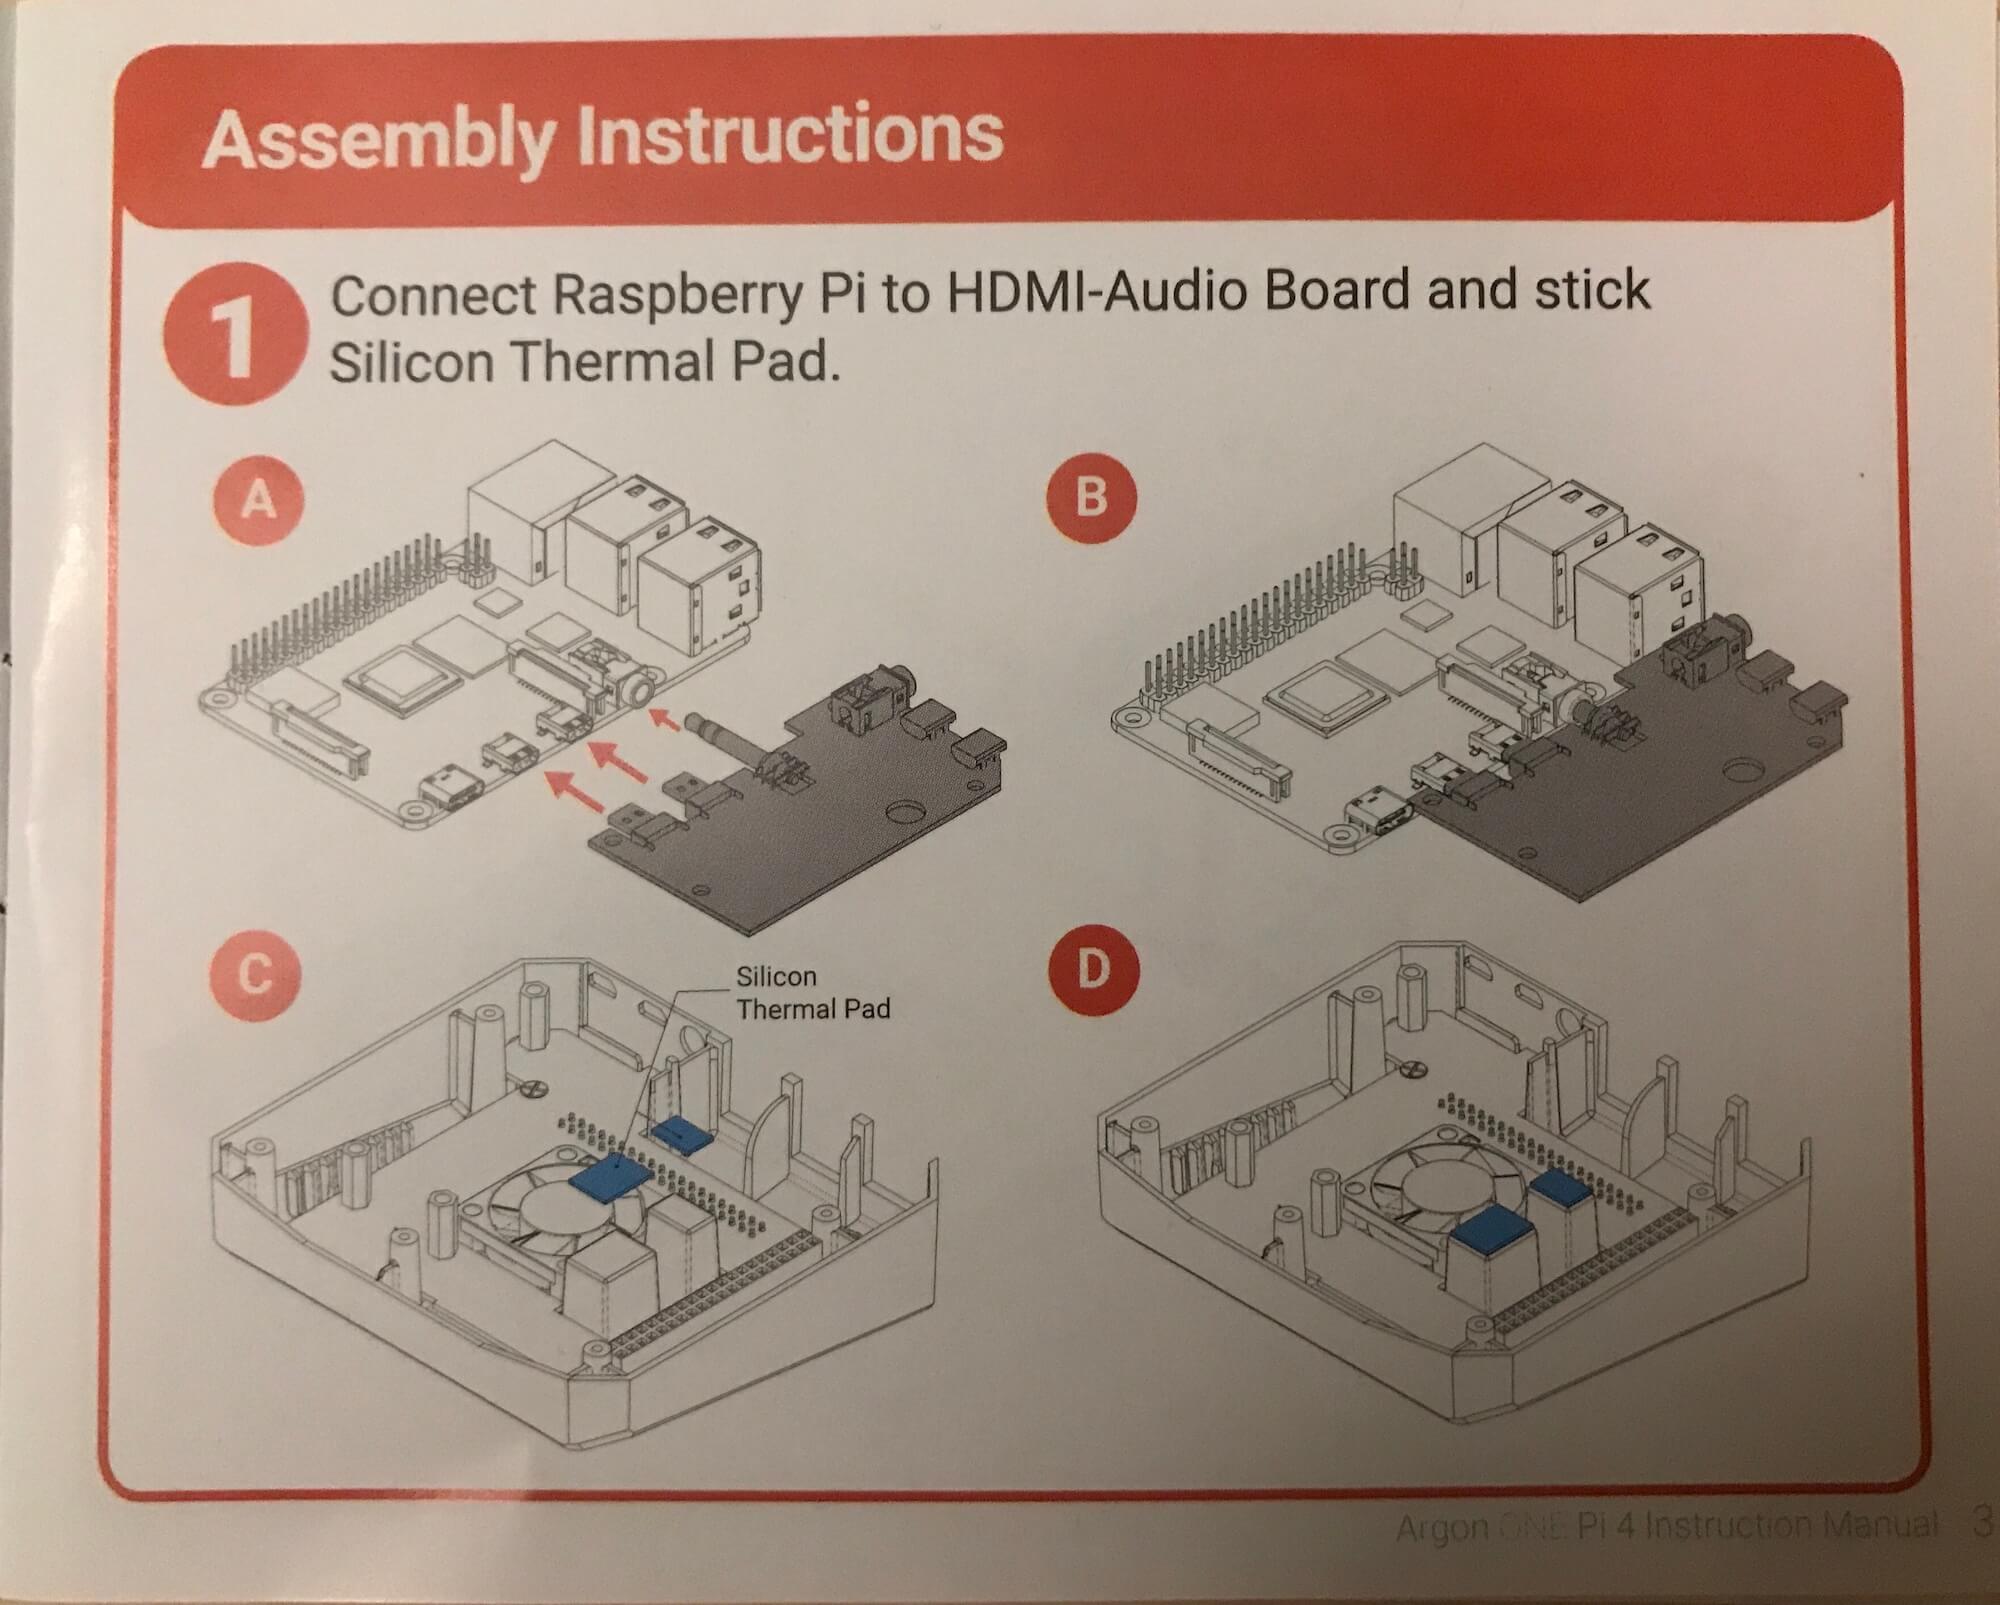 Example of the case assembly instructions